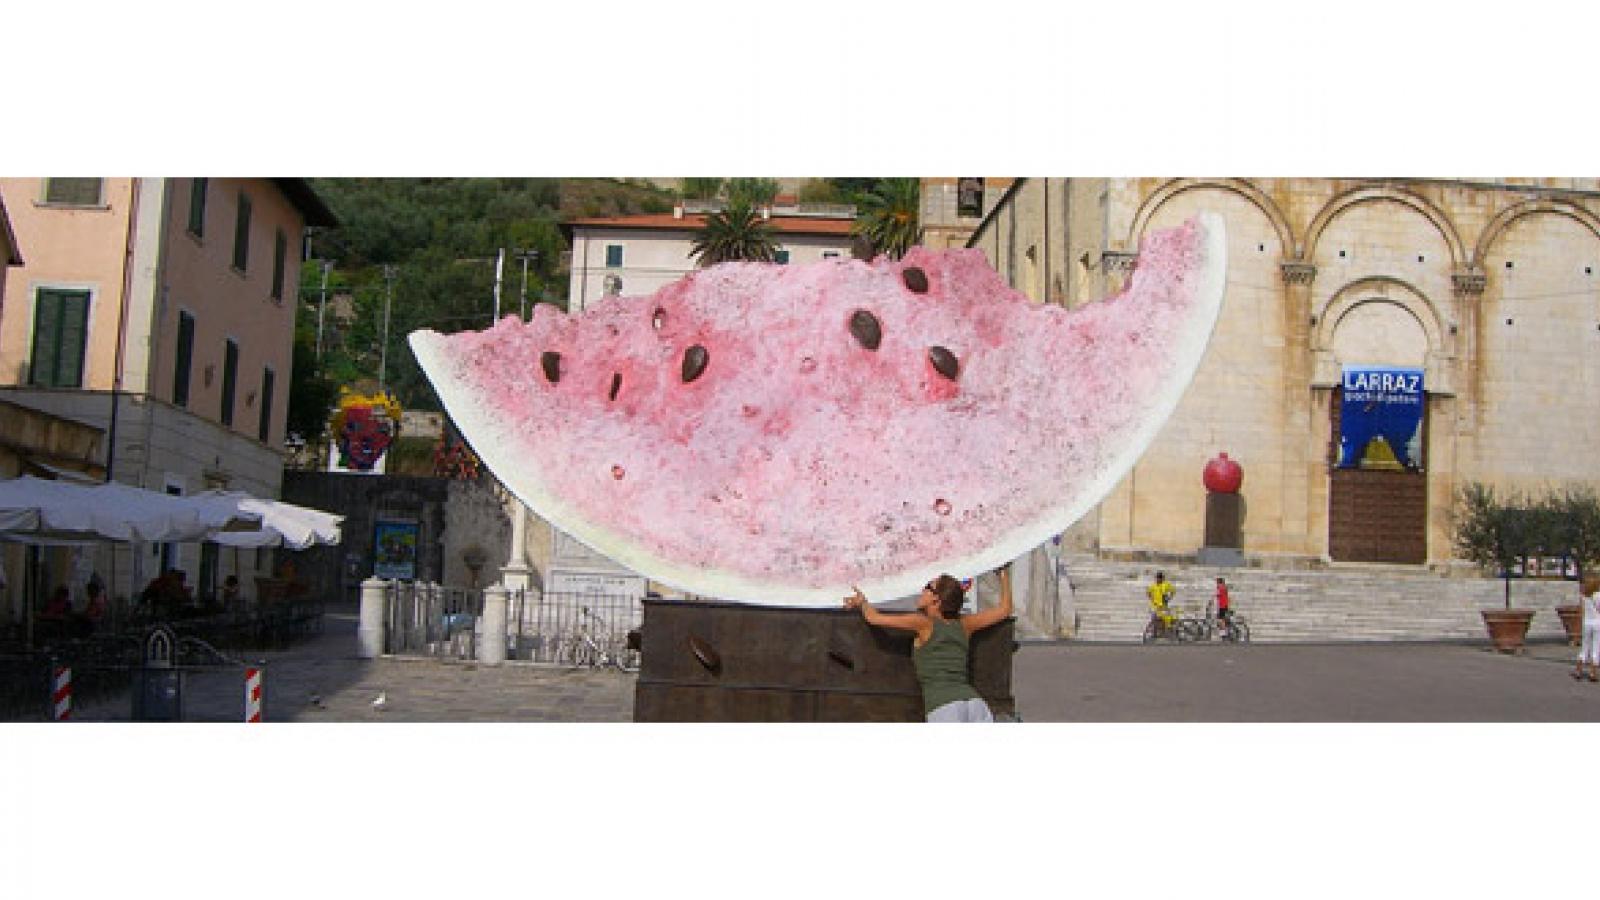 A statue of an enormous slice of watermelon.